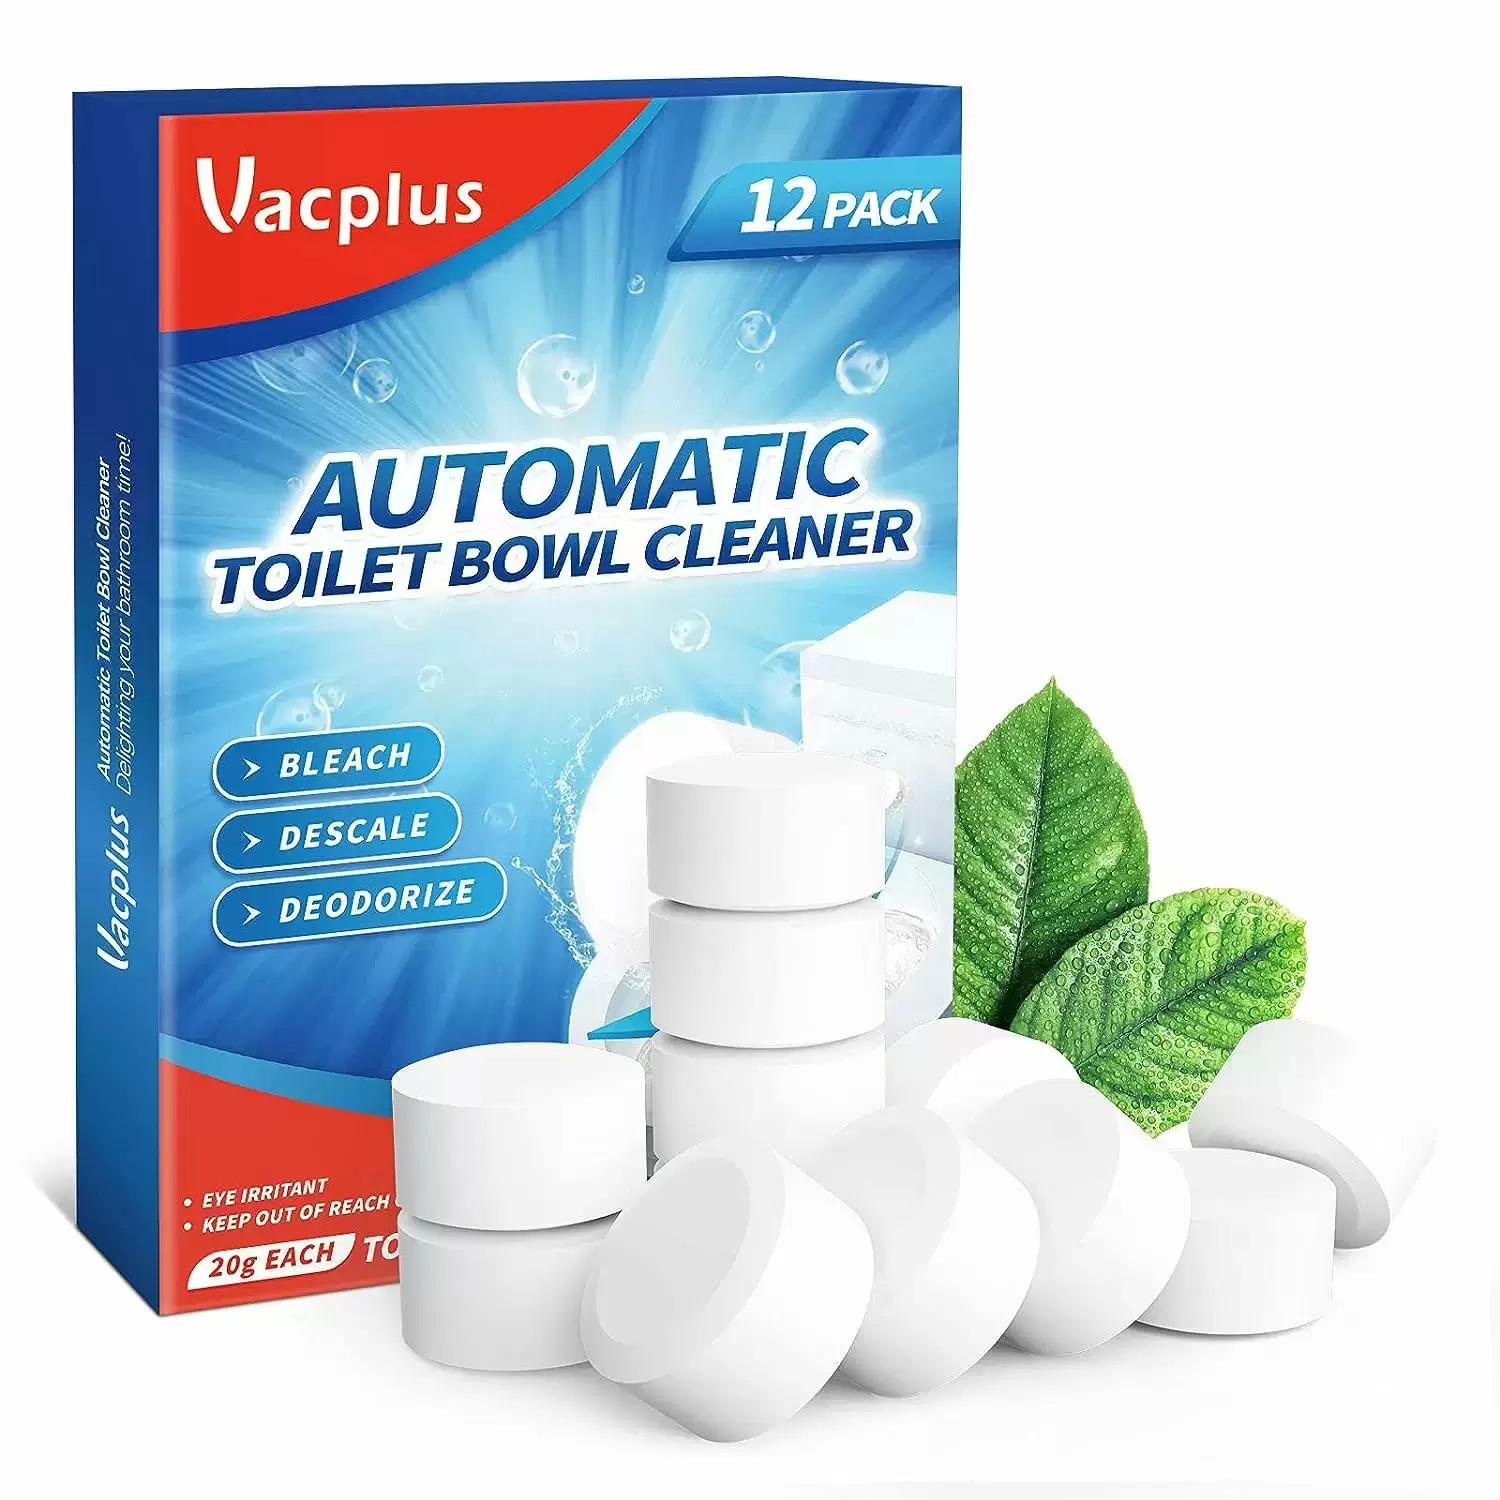 Vacplus Toilet Bowl Cleaning Tablets 12 Pack for $4.04 Shipped